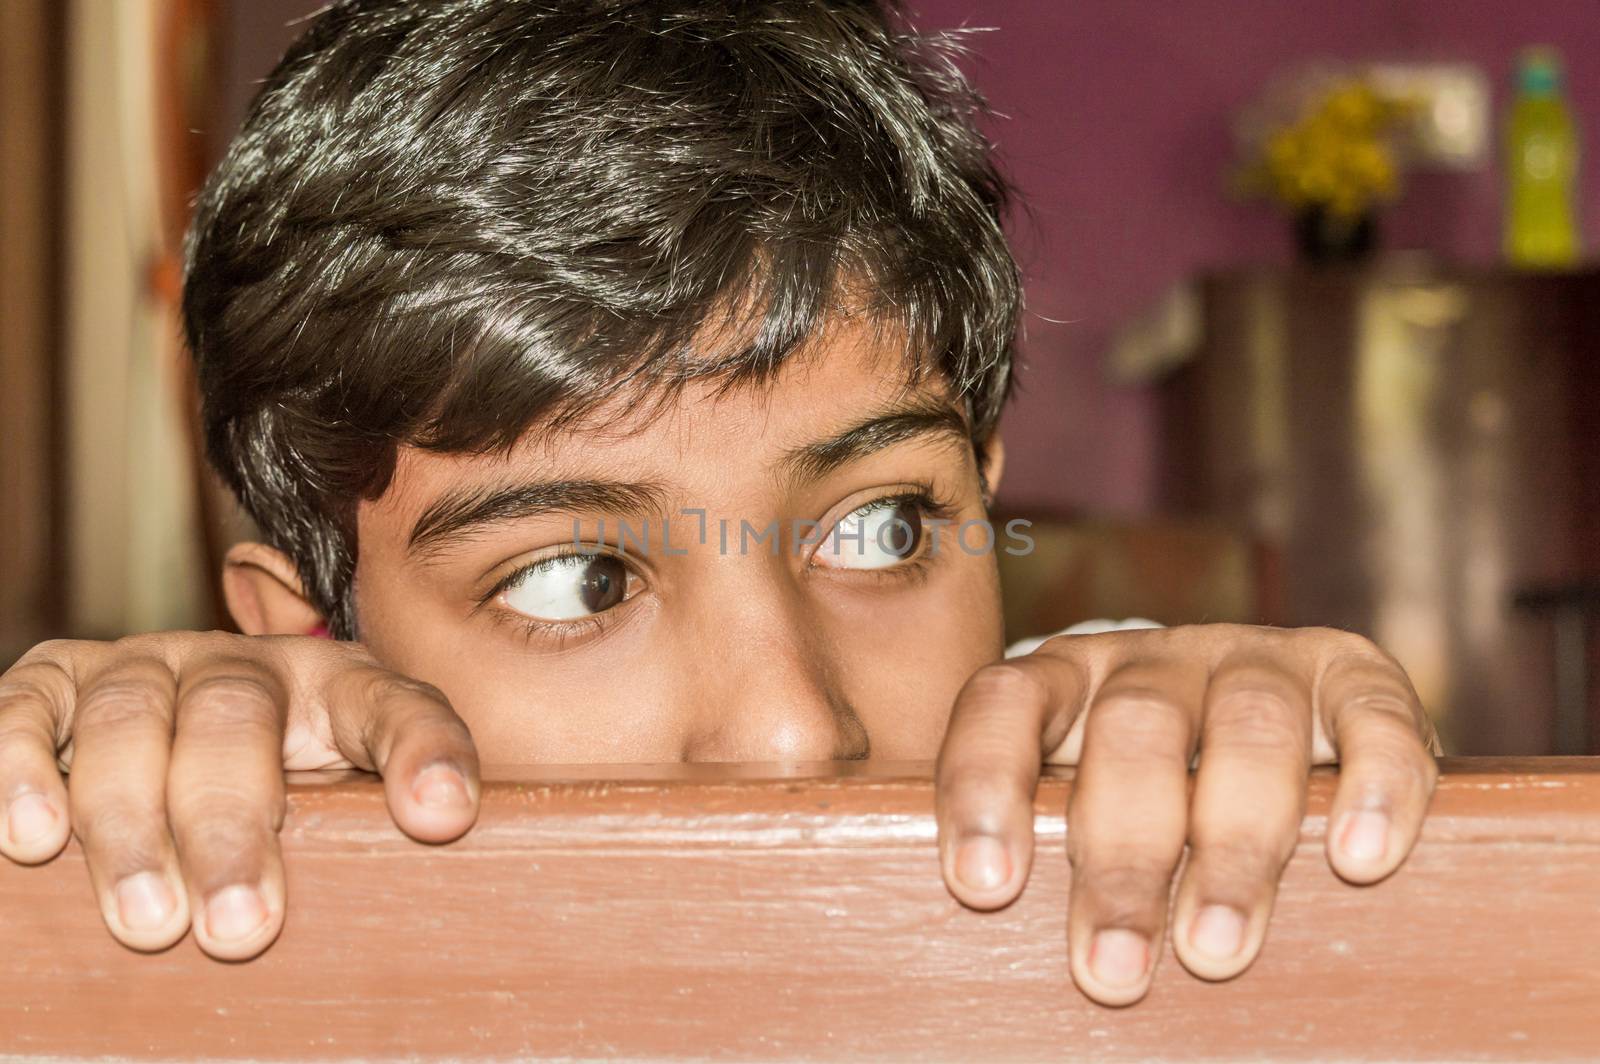 Young boy curiously looking outside through a window. by sudiptabhowmick